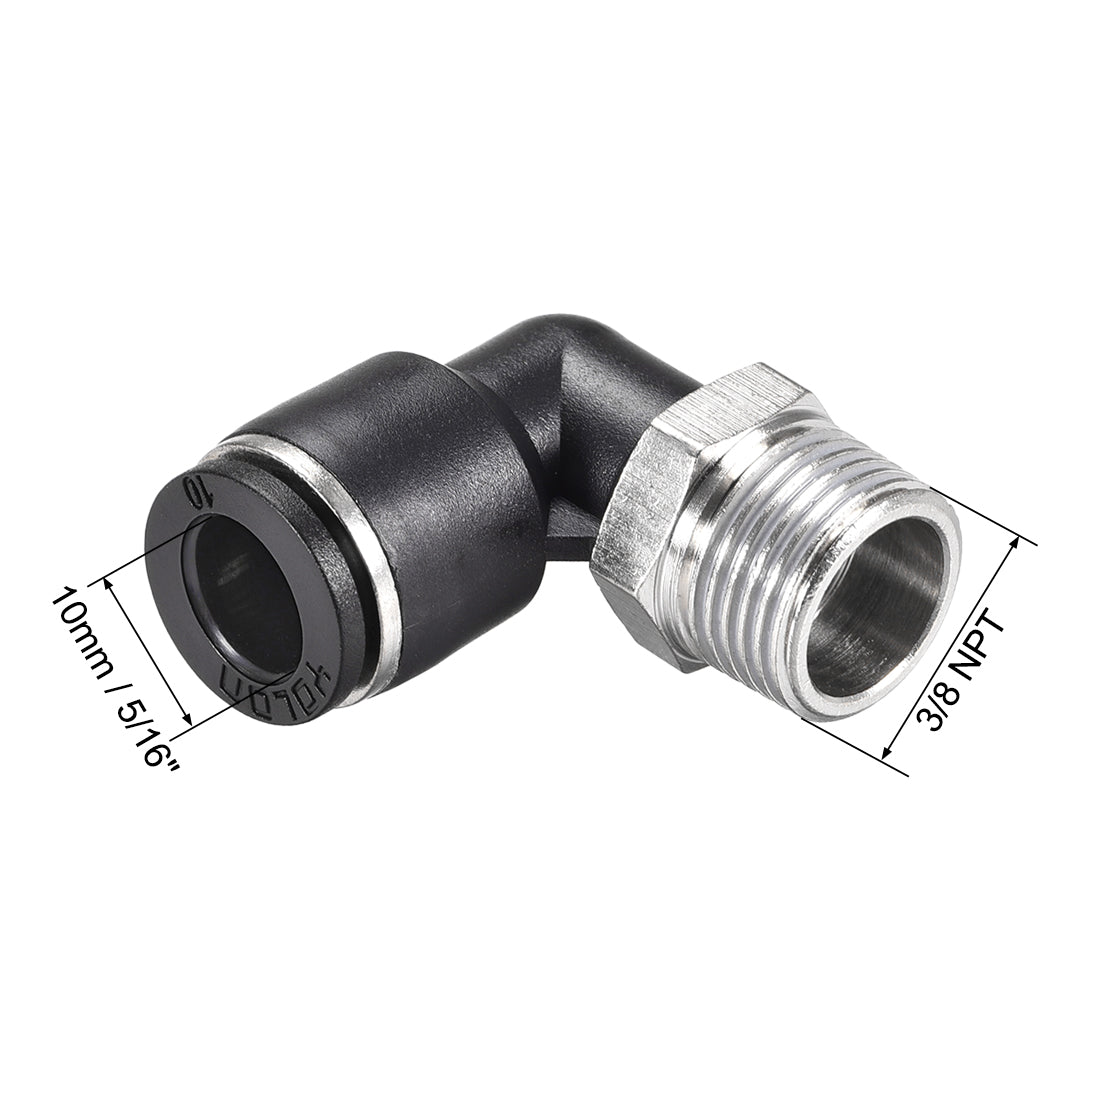 uxcell Uxcell Push to Connect Tube Fitting Male Elbow 10mm Tube OD x 3/8 NPT Thread Pneumatic Air Push Fit Lock Fitting 2pcs